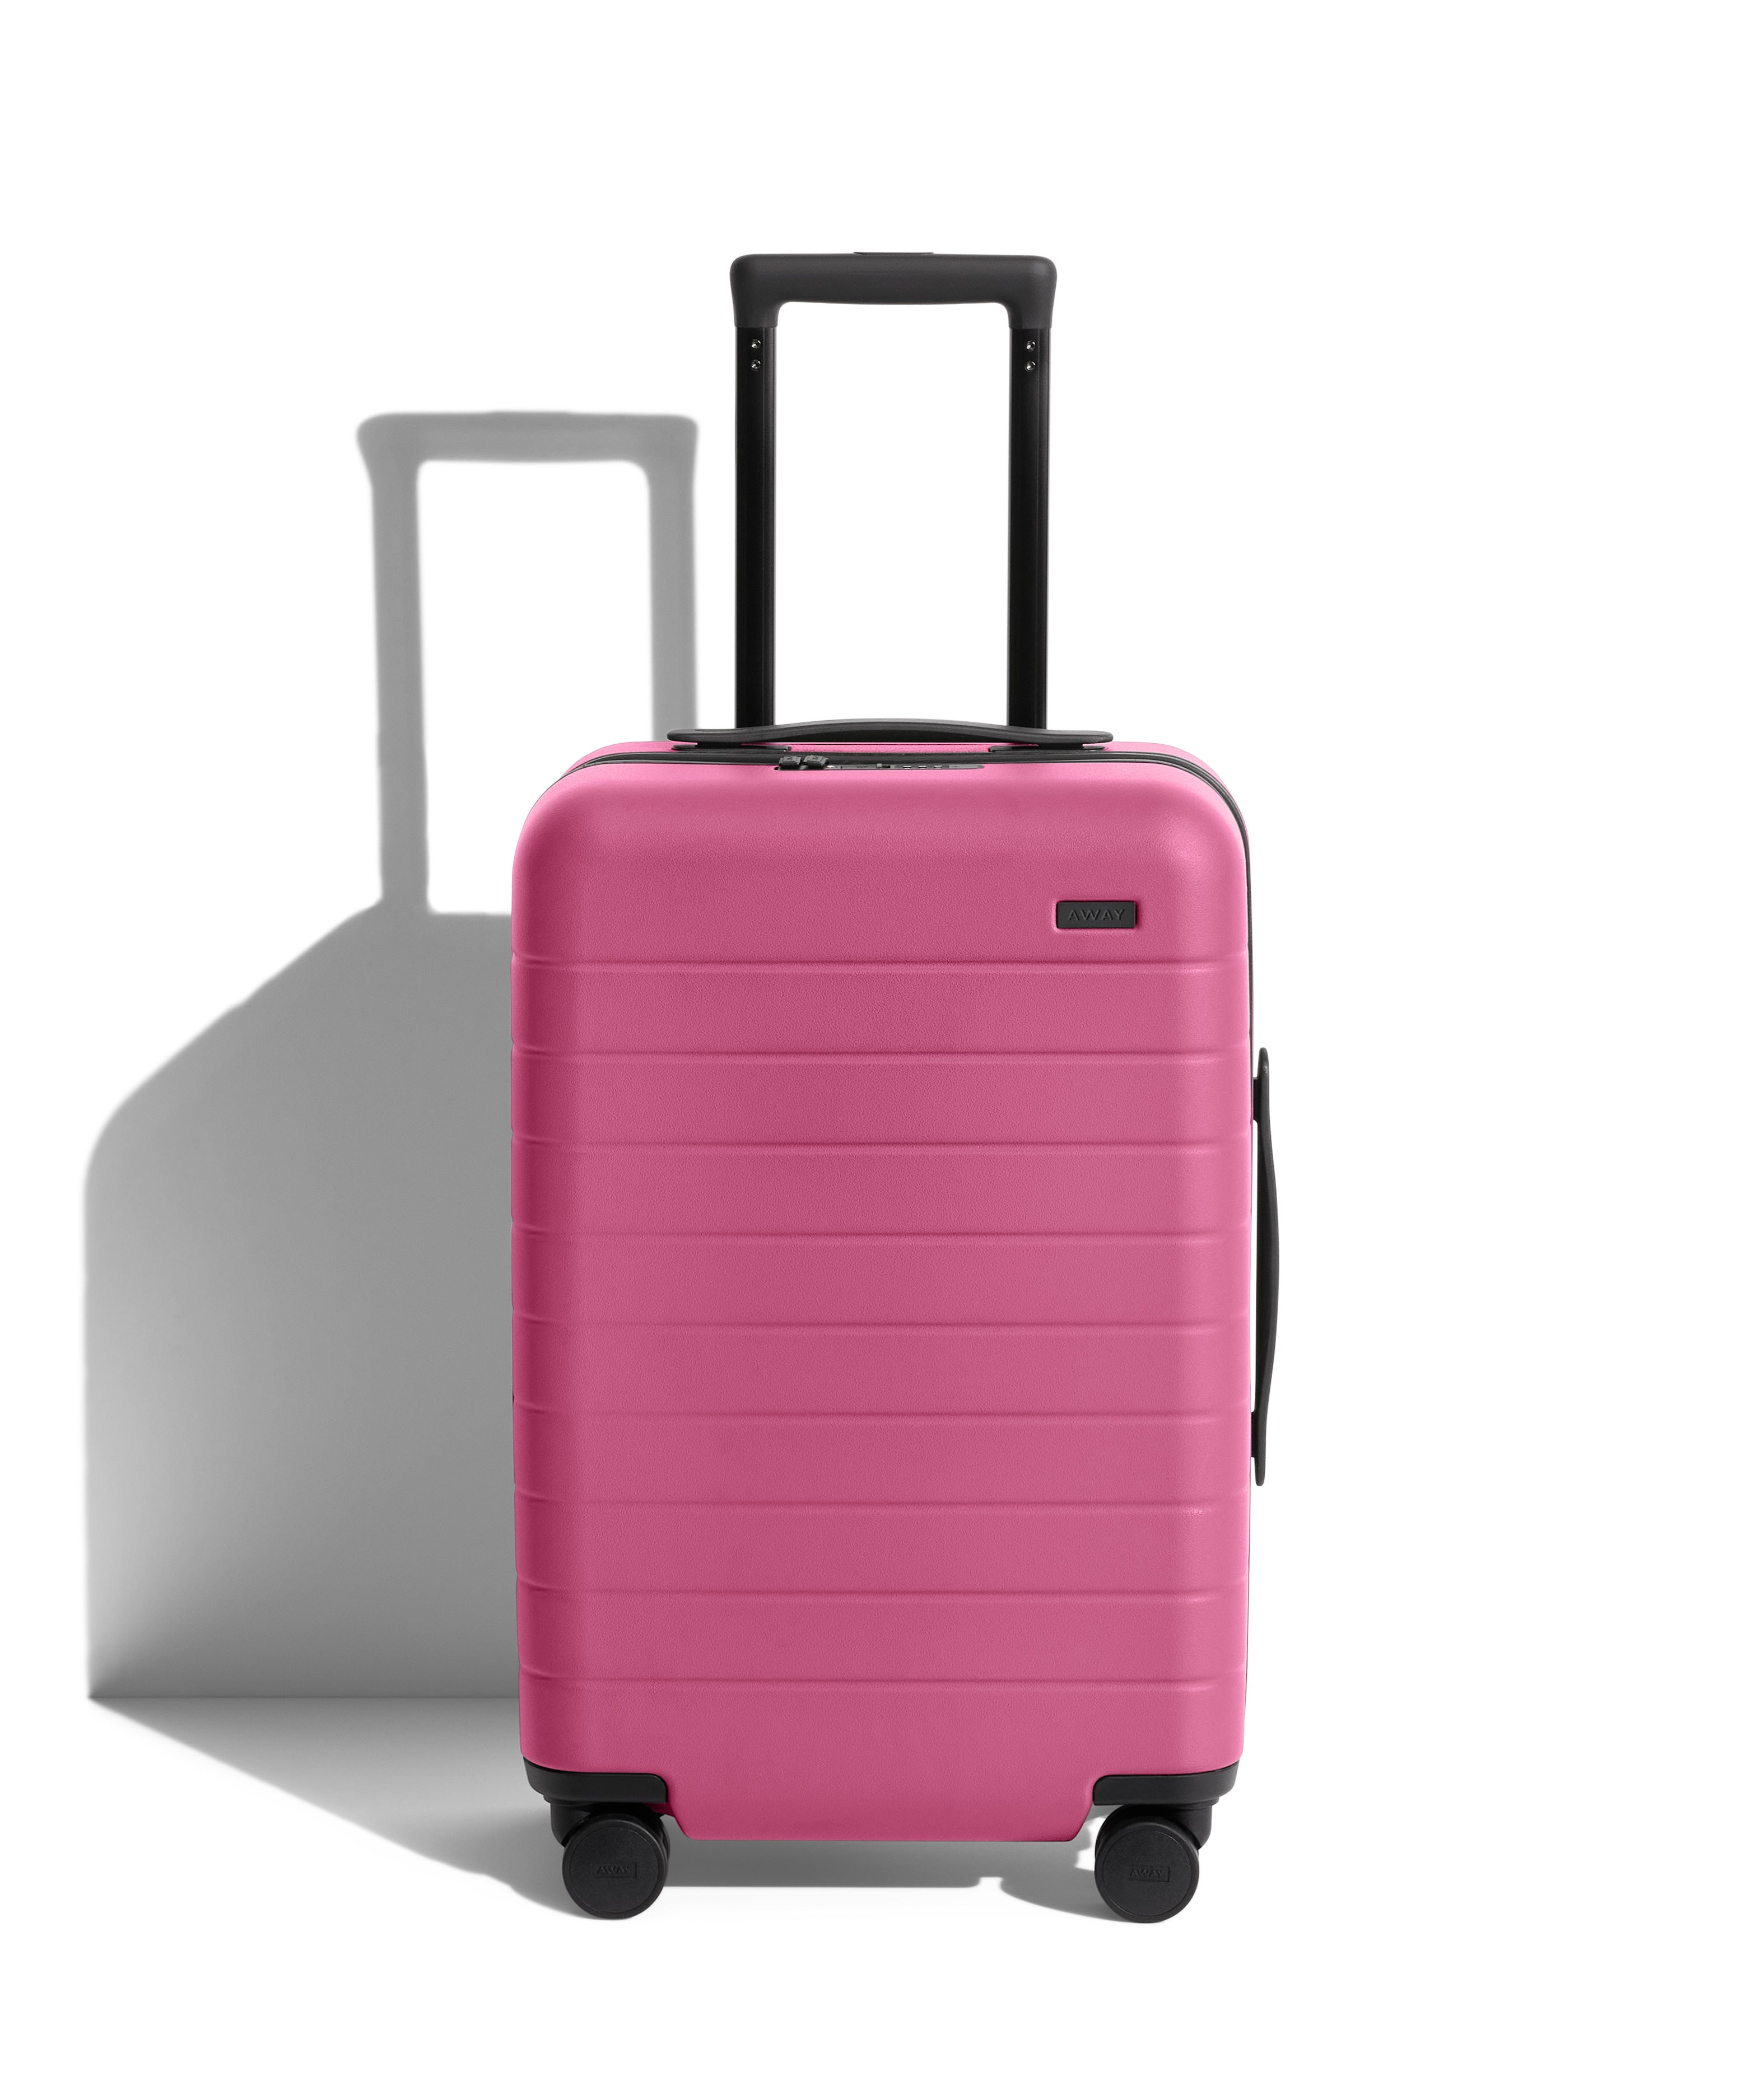 Away + The Carry-On (Island Pink)